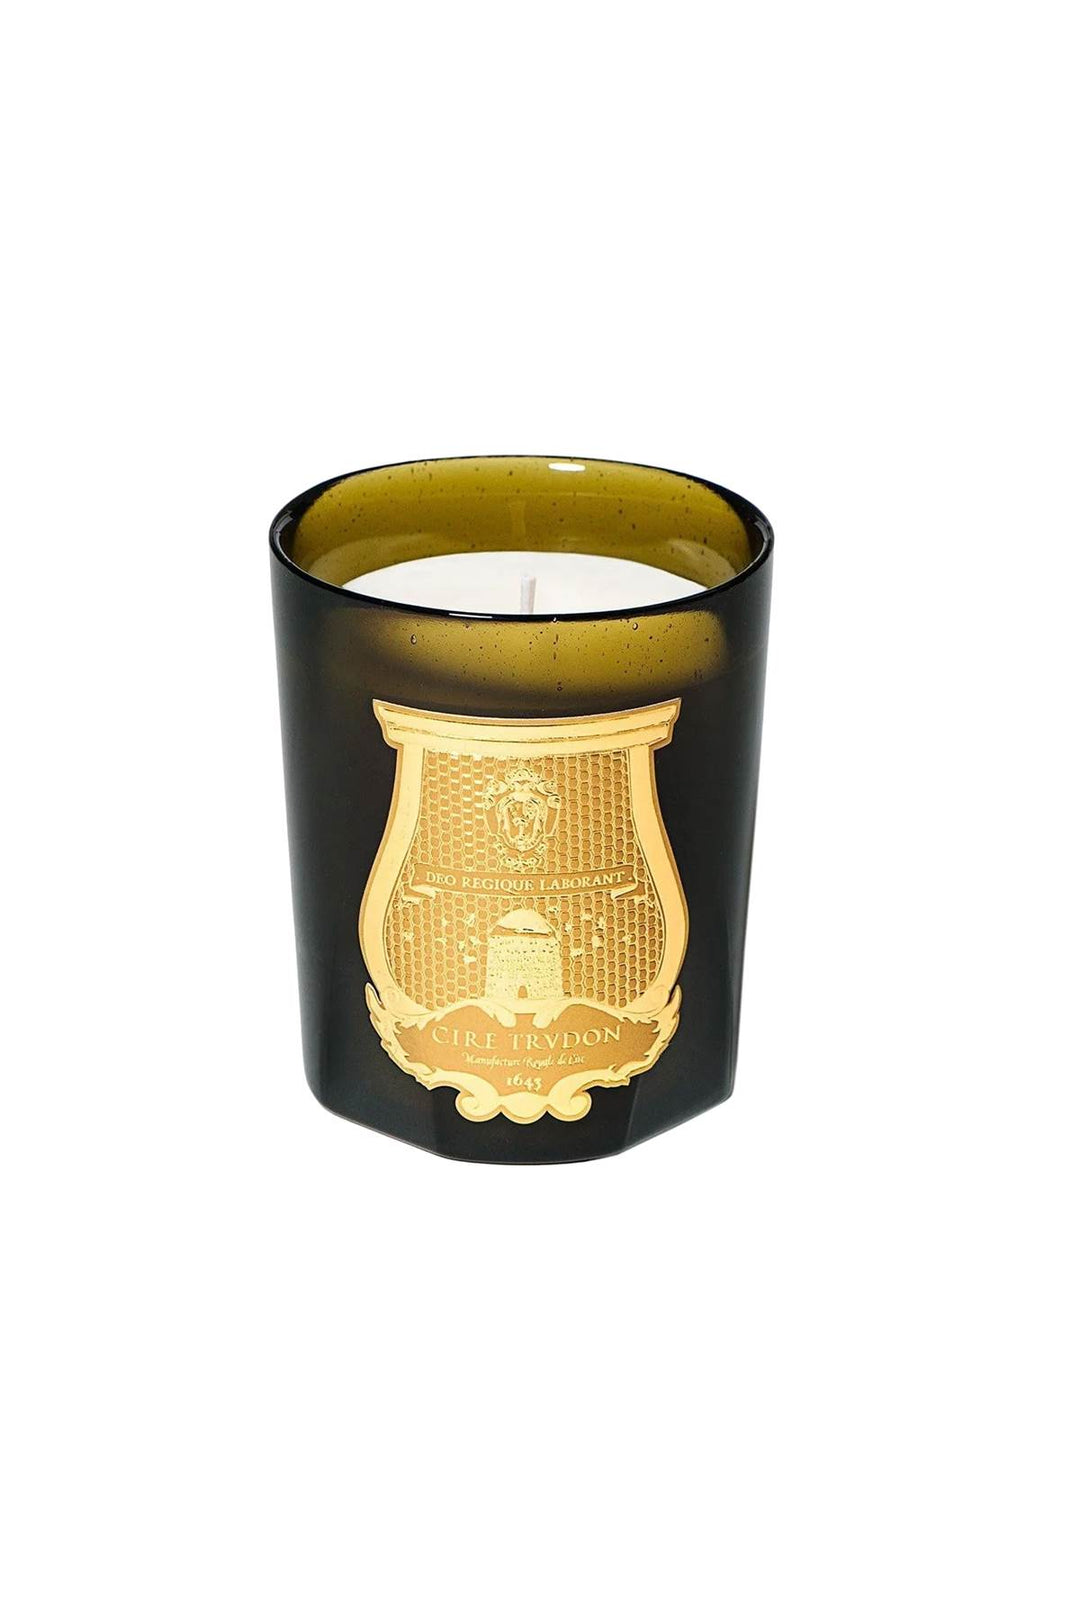 Cire trvdon scented candle cyrnos --0